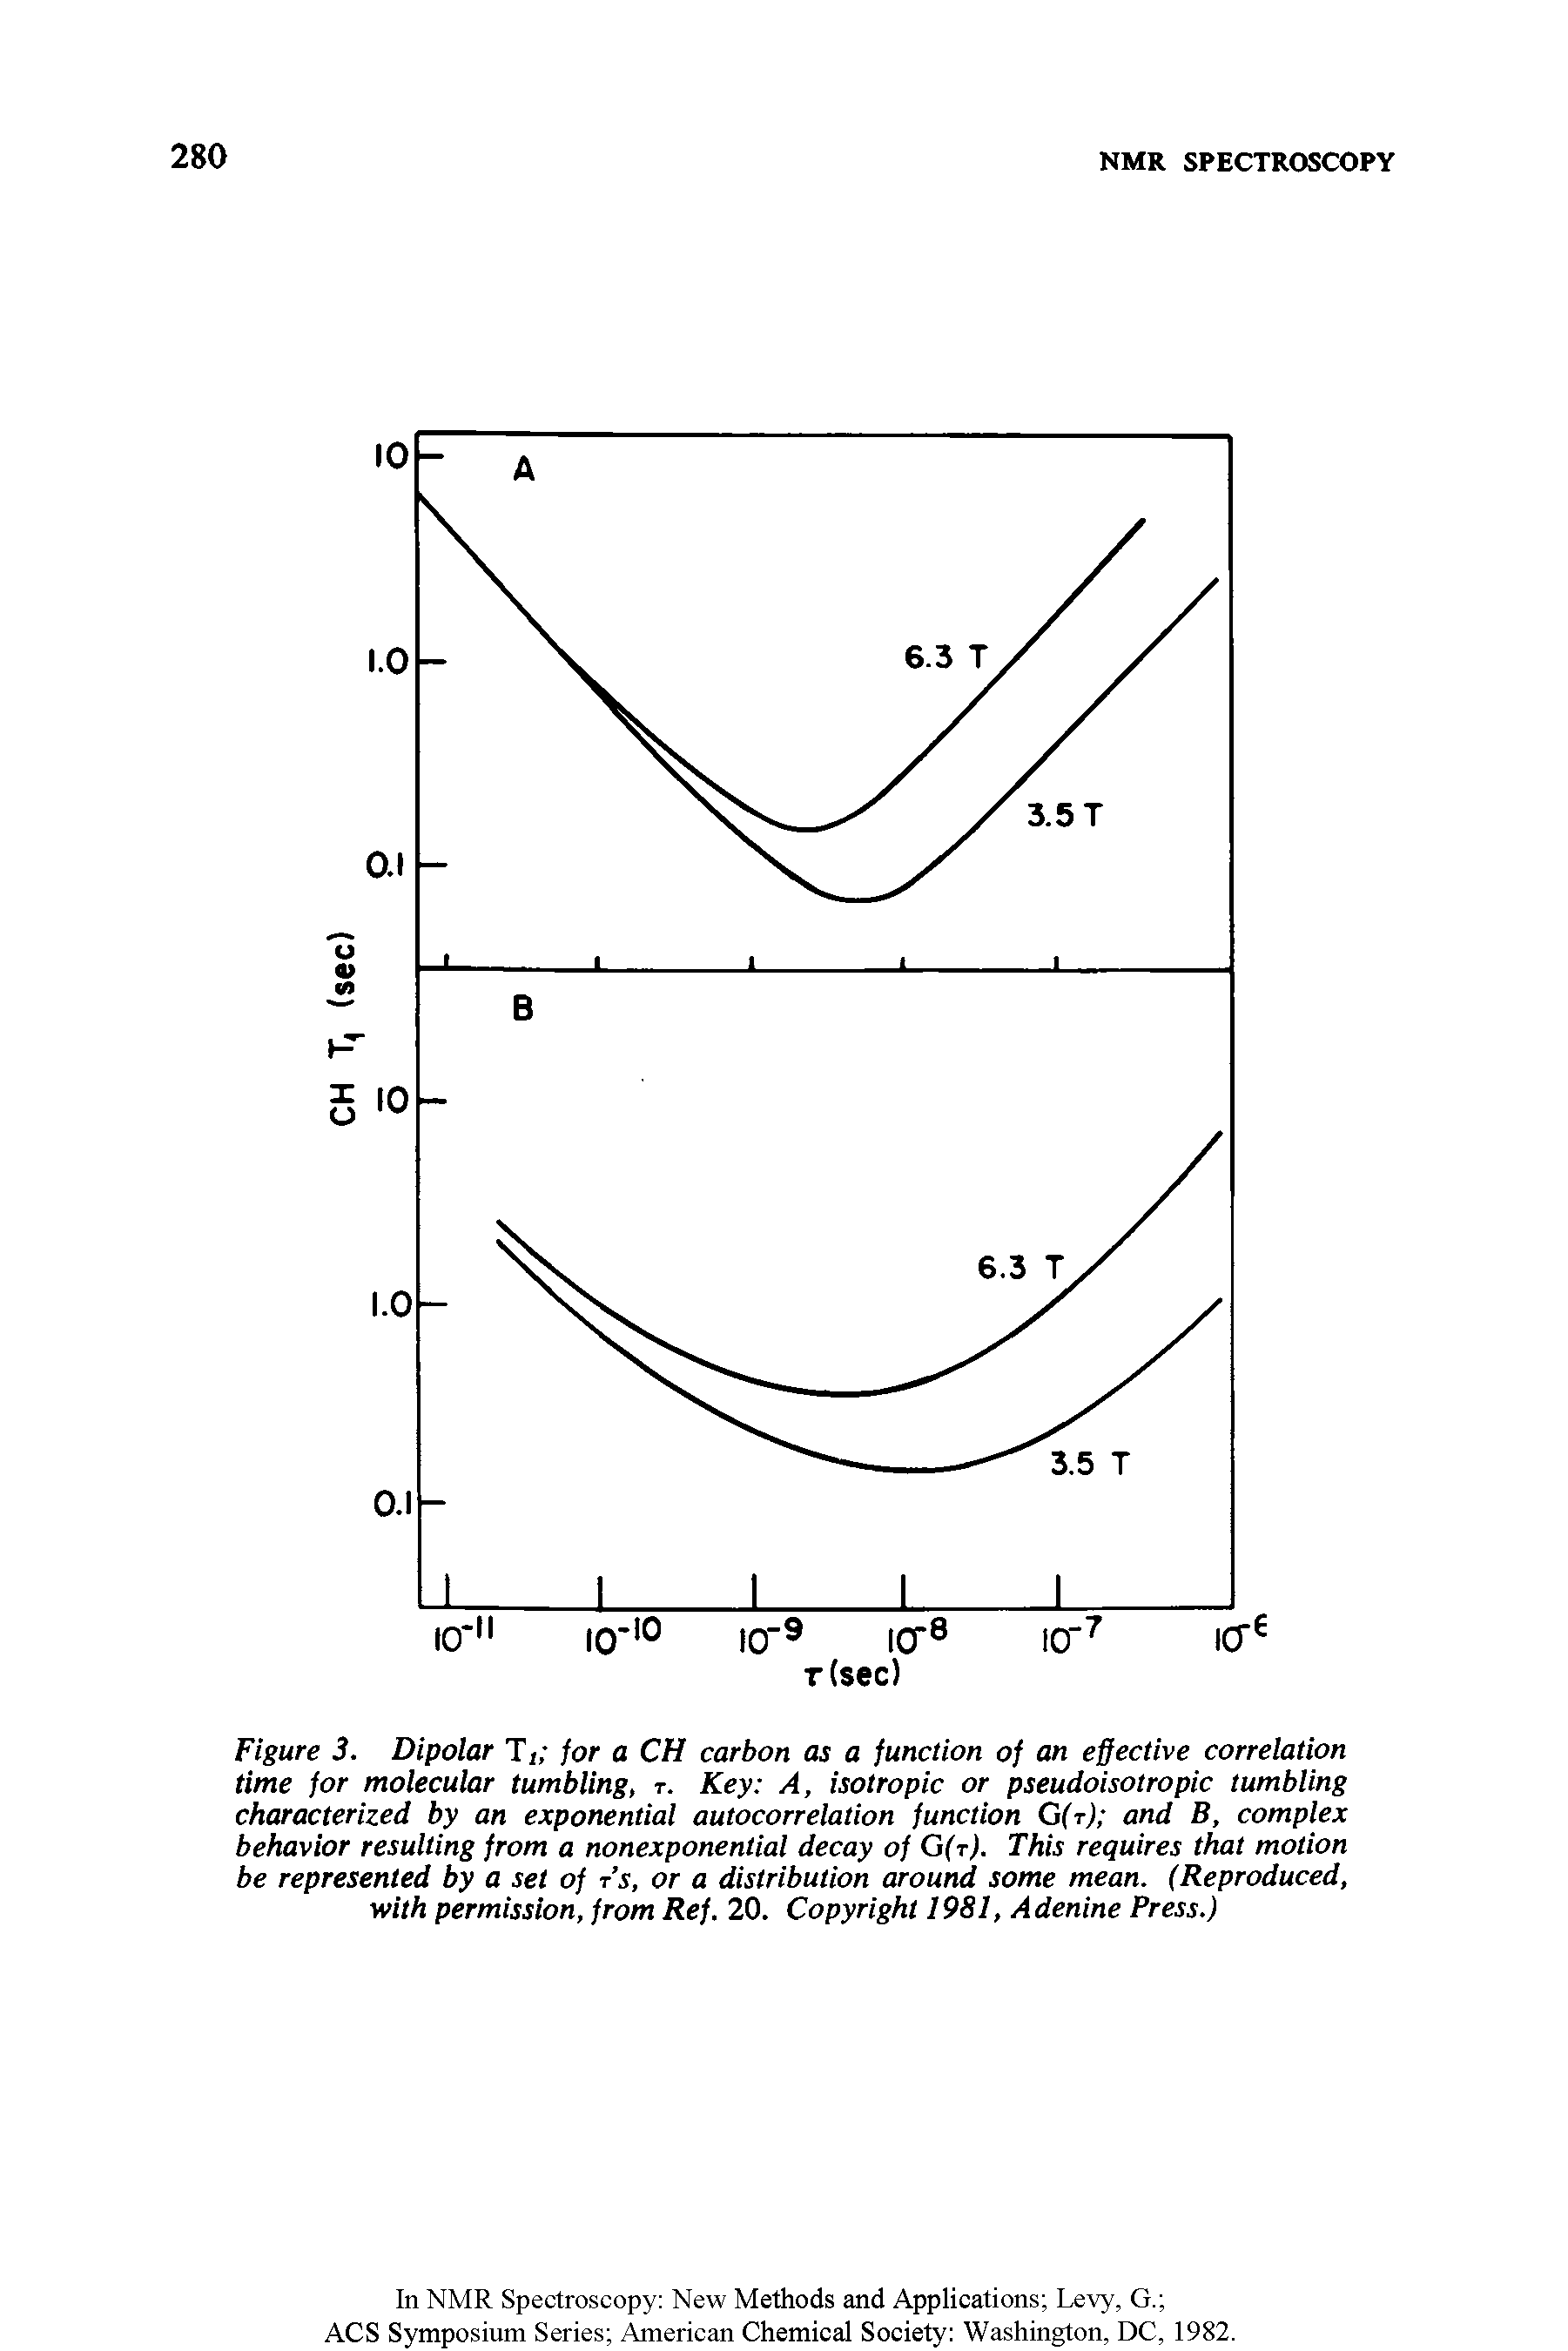 Figure 3. Dipolar J, for a CH carbon as a function of an effective correlation time for molecular tumbling, t. Key A, isotropic or pseudoisotropic tumbling characterized by an exponential autocorrelation function G(t) and B, complex behavior resulting from a nonexponential decay of G(t). This requires that motion be represented by a set of t s, or a distribution around some mean. (Reproduced, with permission, from Ref. 20. Copyright 1981, Adenine Press.)...